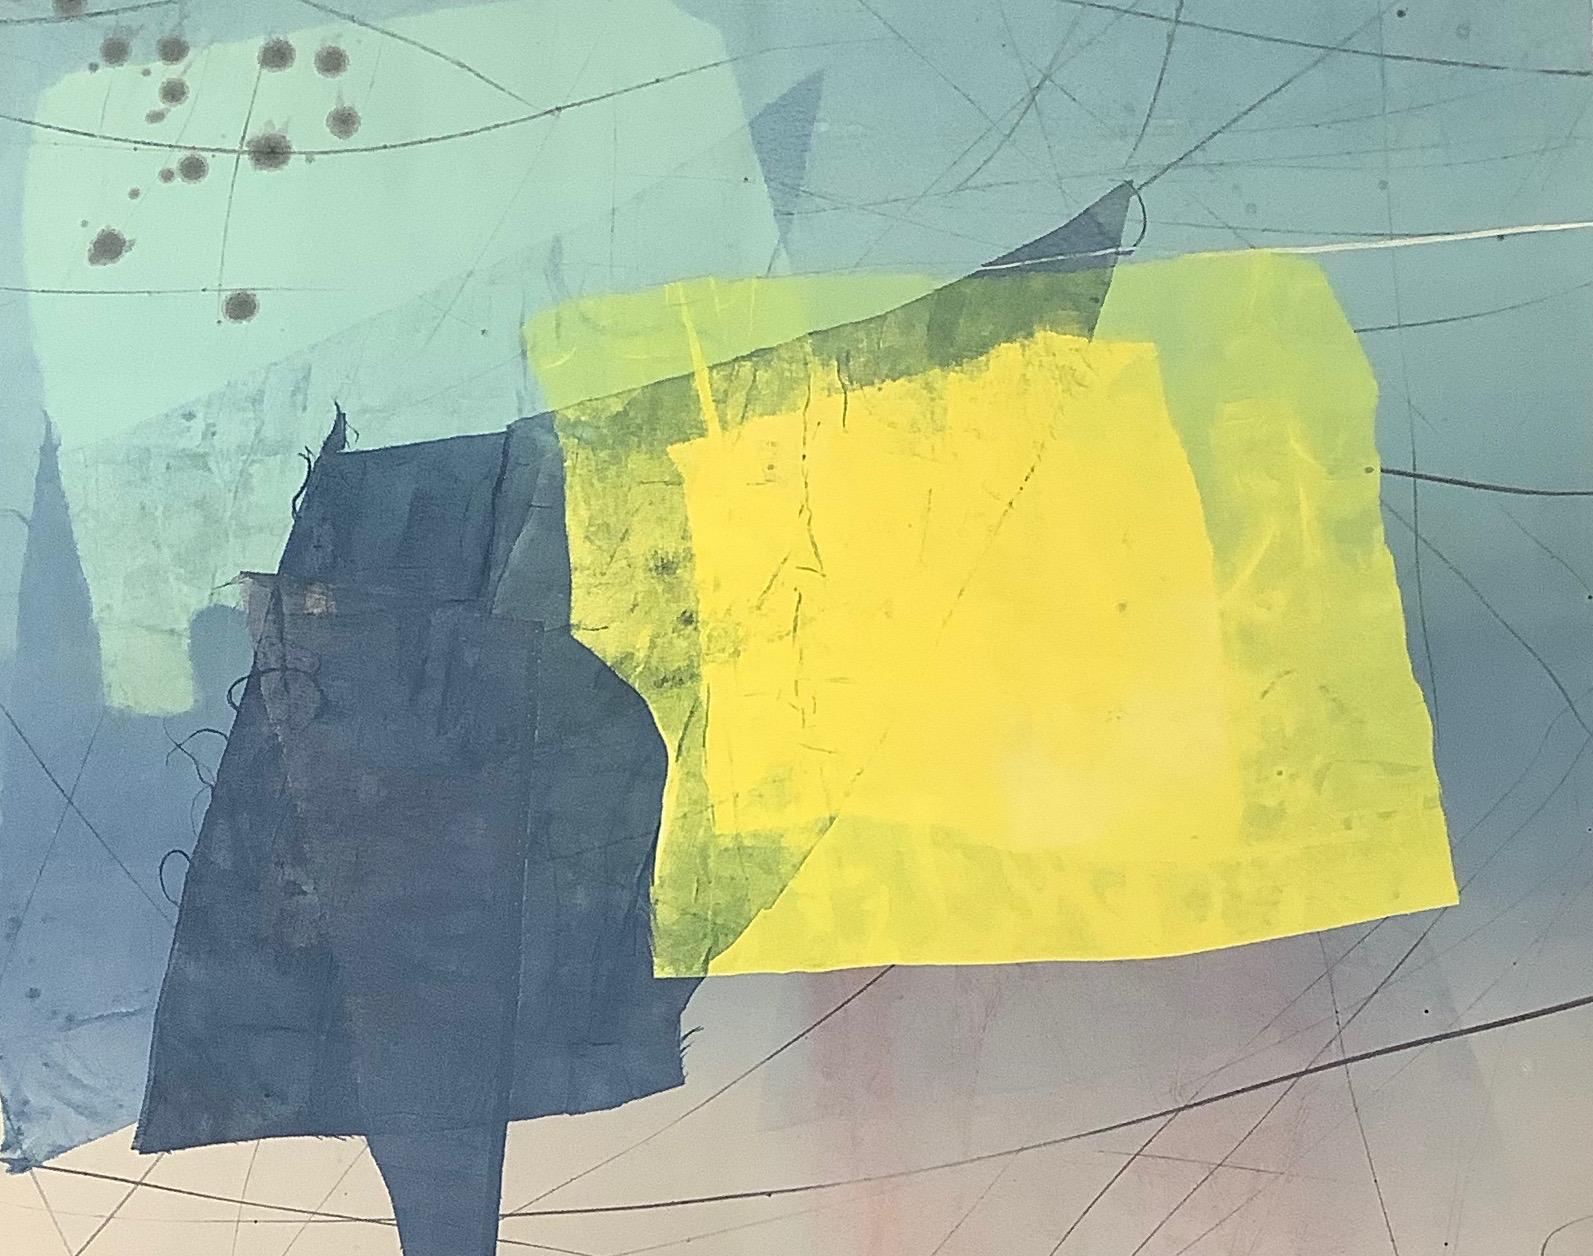 This is a monotype print, a unique print with no other editions. This monotype on delicate Asian paper layers geometric shapes in yellow, teal and navy blue on a background that transitions from gray to light blue.

Available unframed, please